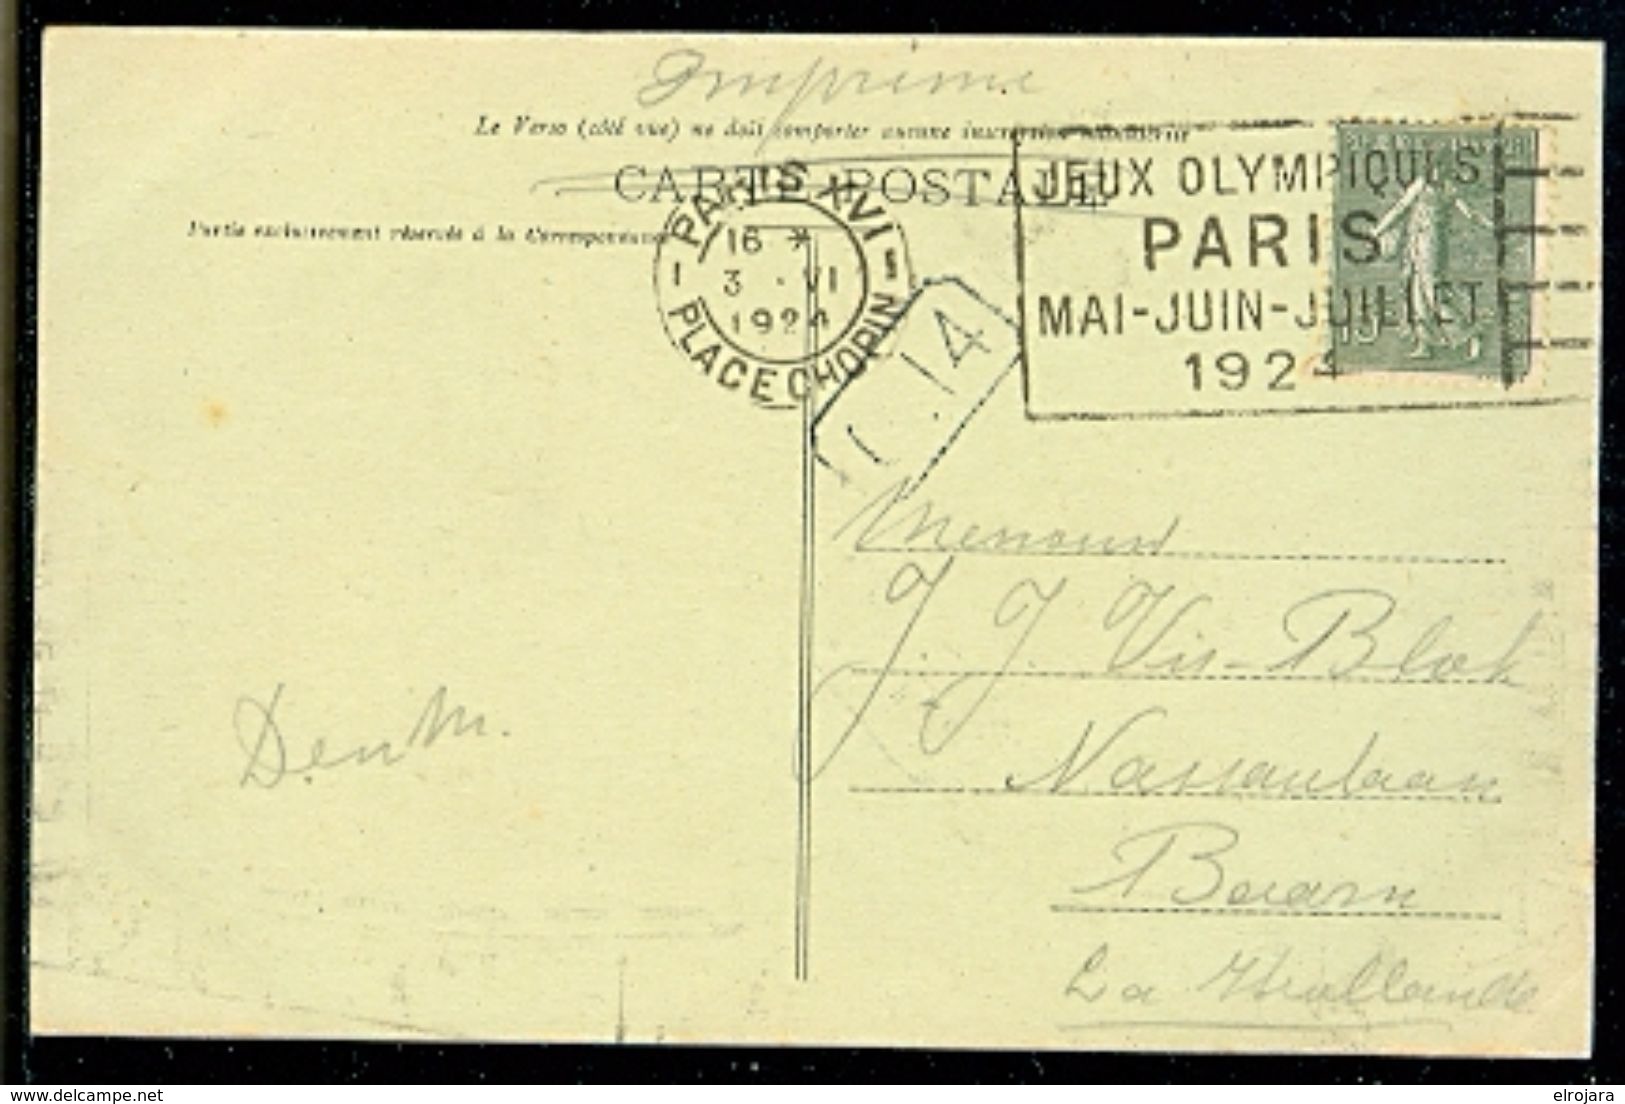 FRANCE Olympic Machine Cancel Paris XVI Place Chopin On Postcard To The Netherlands Of 3 VI 1924 - Summer 1924: Paris